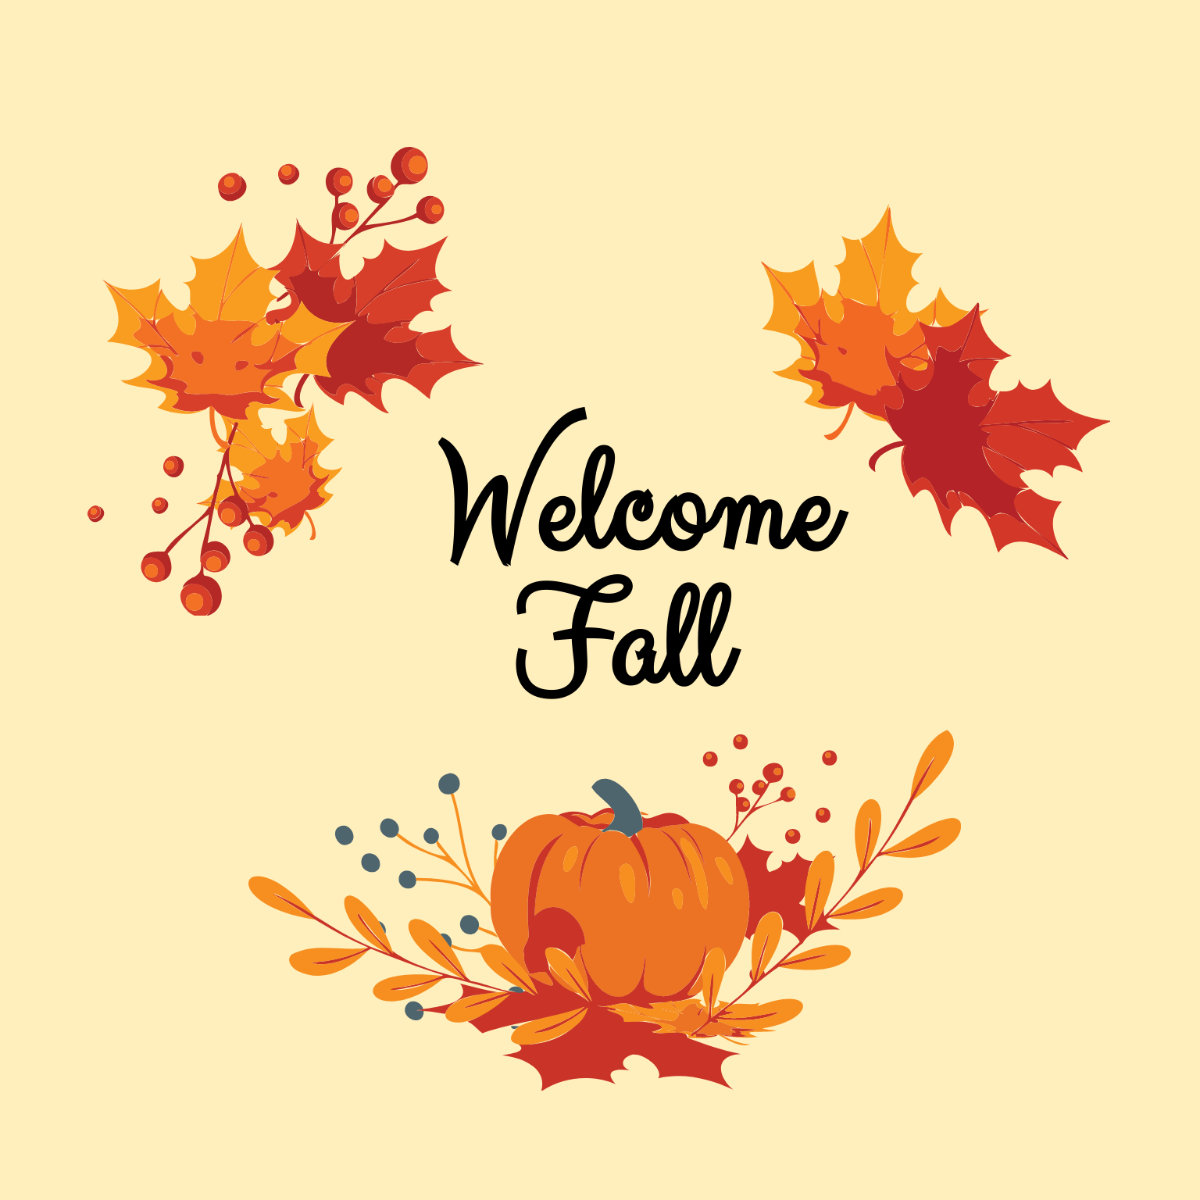 Welcome Fall Vector Template